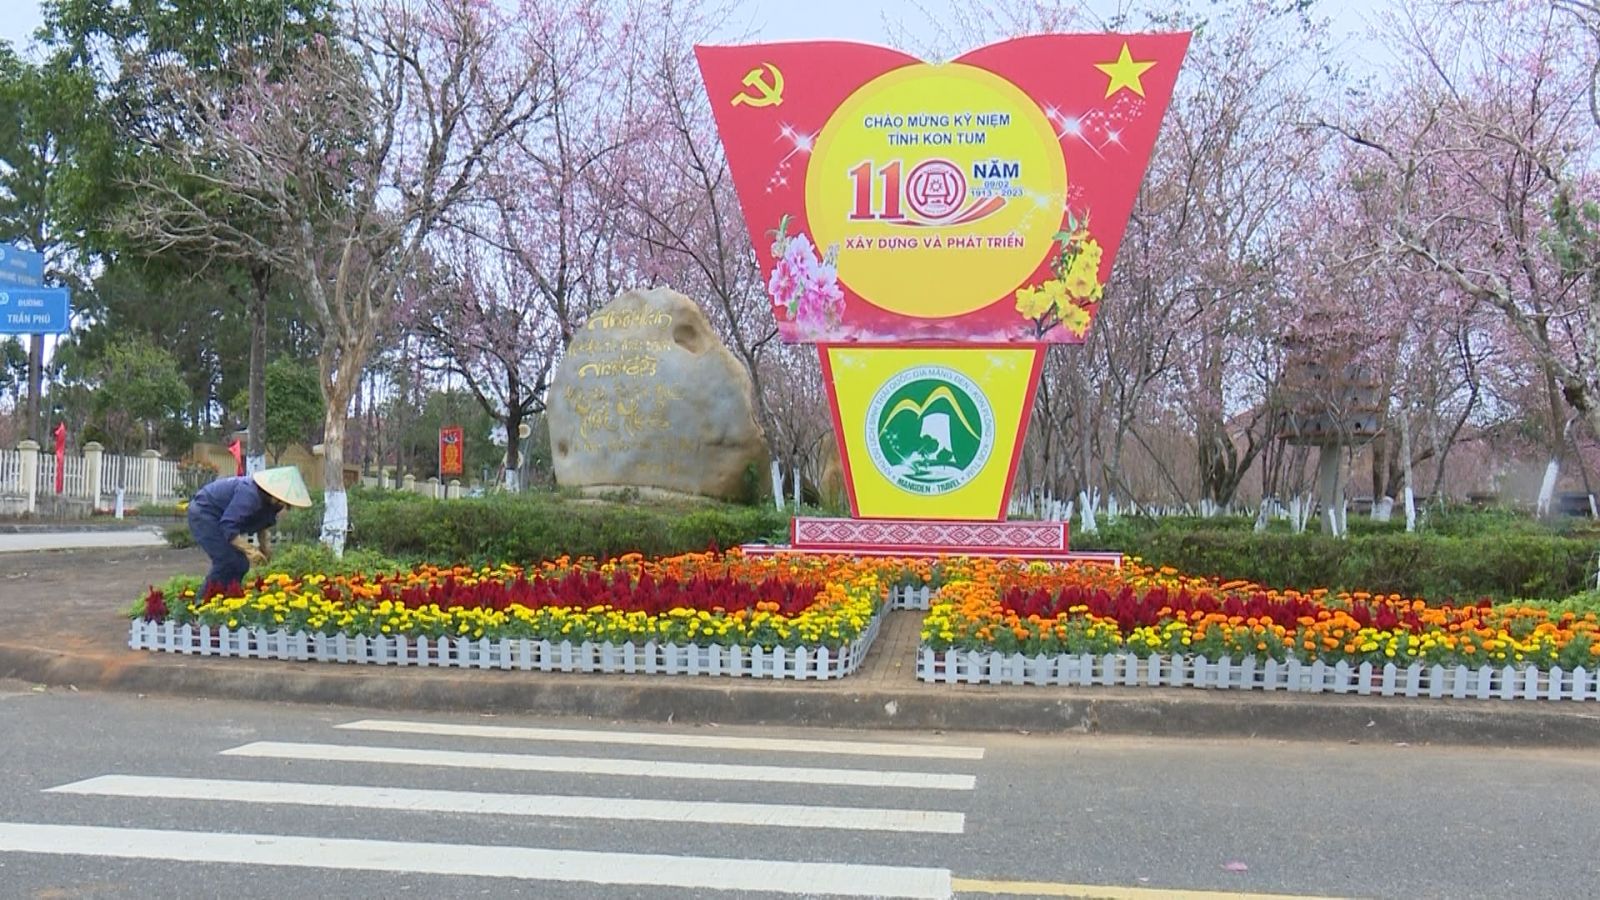  Măng Đen is ready to serve tourists during the Lunar New Year.